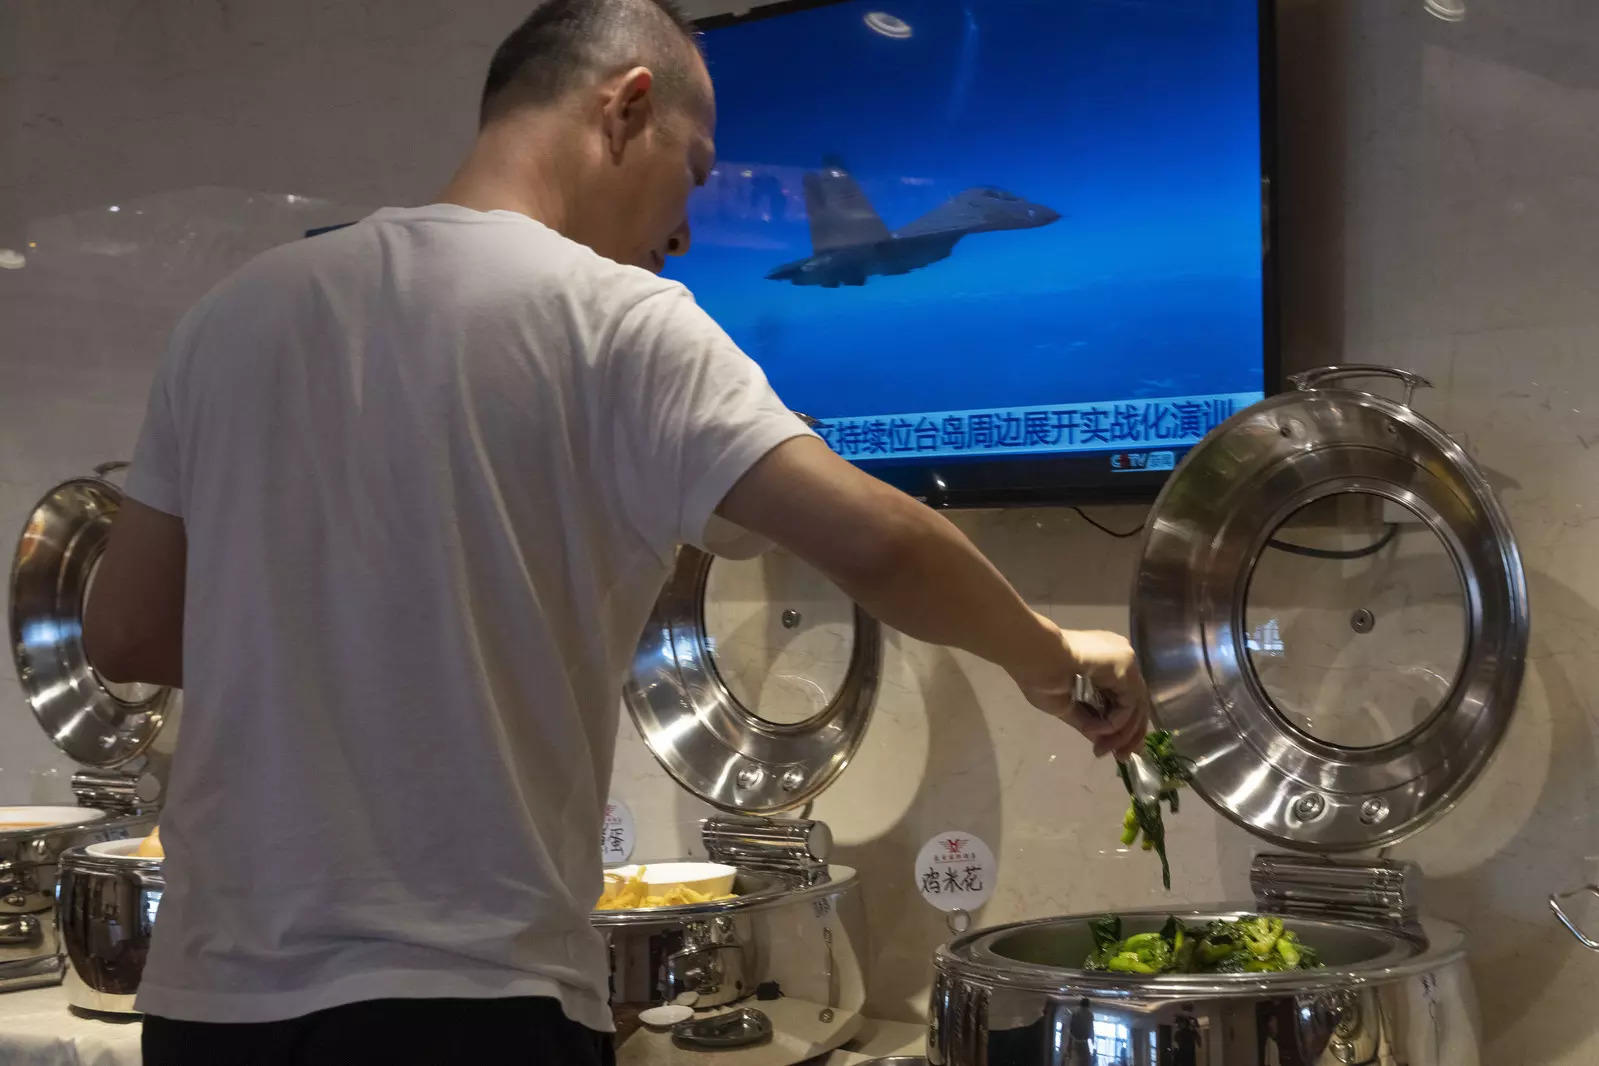 A hotel guests collects food from a breakfast buffet as a news broadcast report on the military exercises, in Pingtan in eastern China's Fujian province on August 6, 2022.  